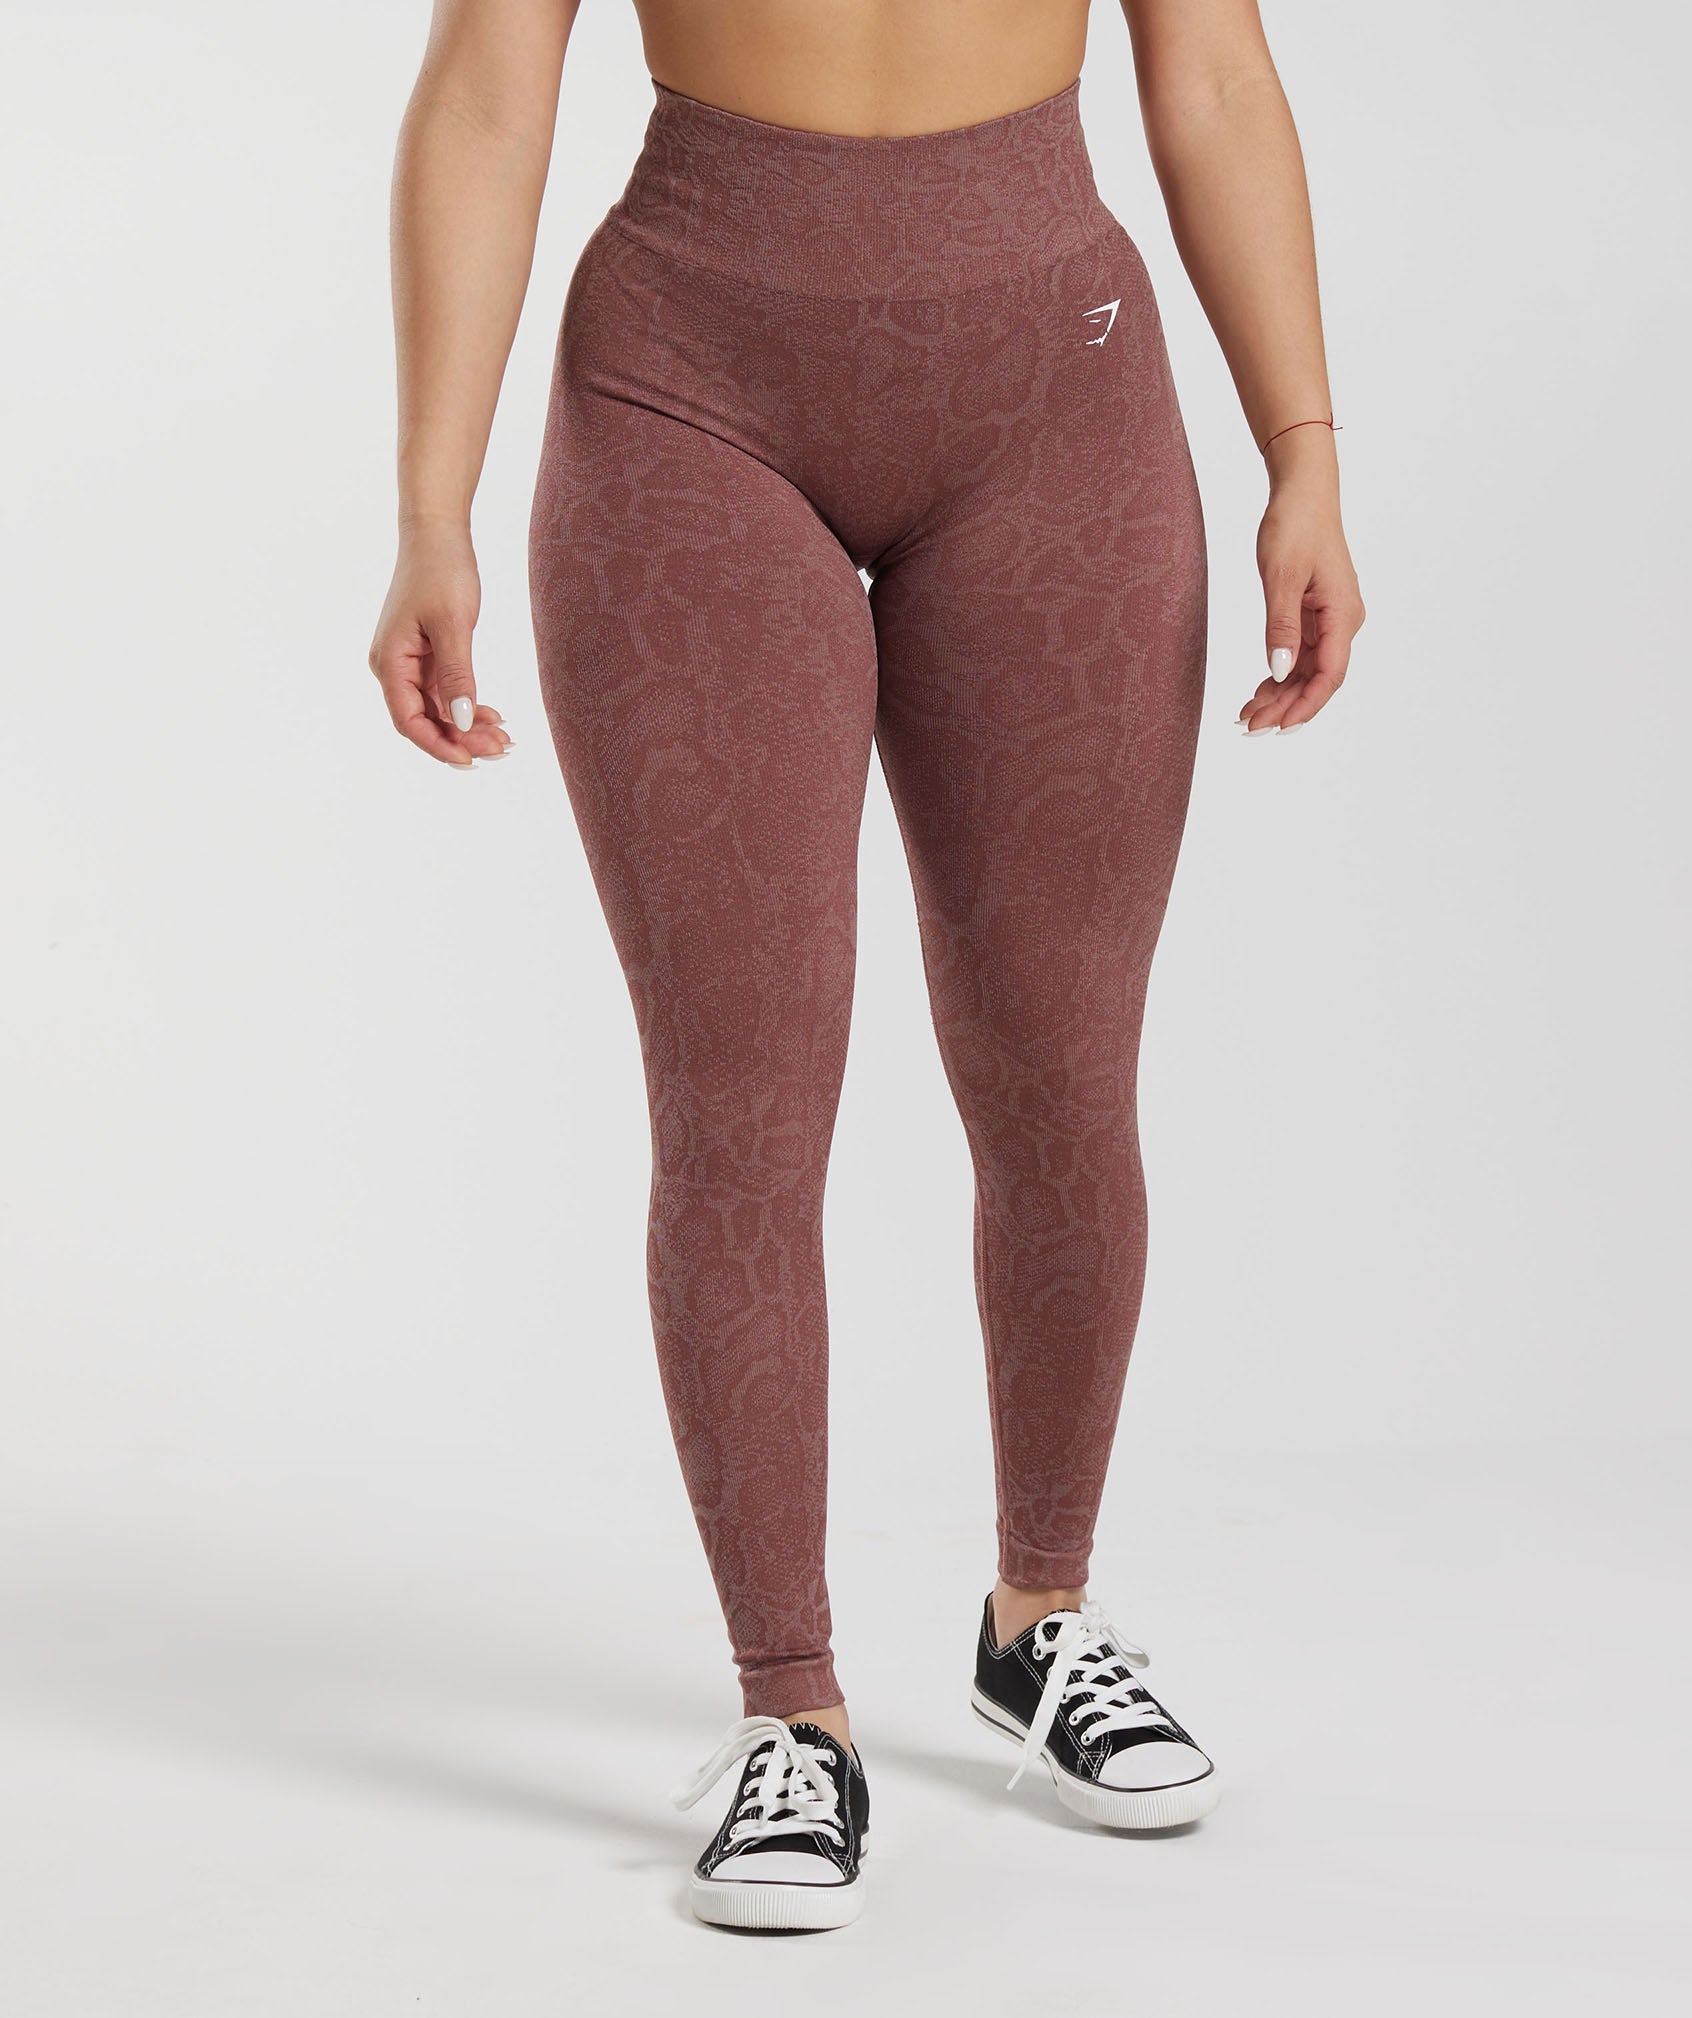 RUNNING GIRL Scrunch Butt Lifting Leggings Women,High Waisted Seamless  Workout Leggings Gym Booty Tights Tummy Control Pants(2896Grey S) at   Women's Clothing store